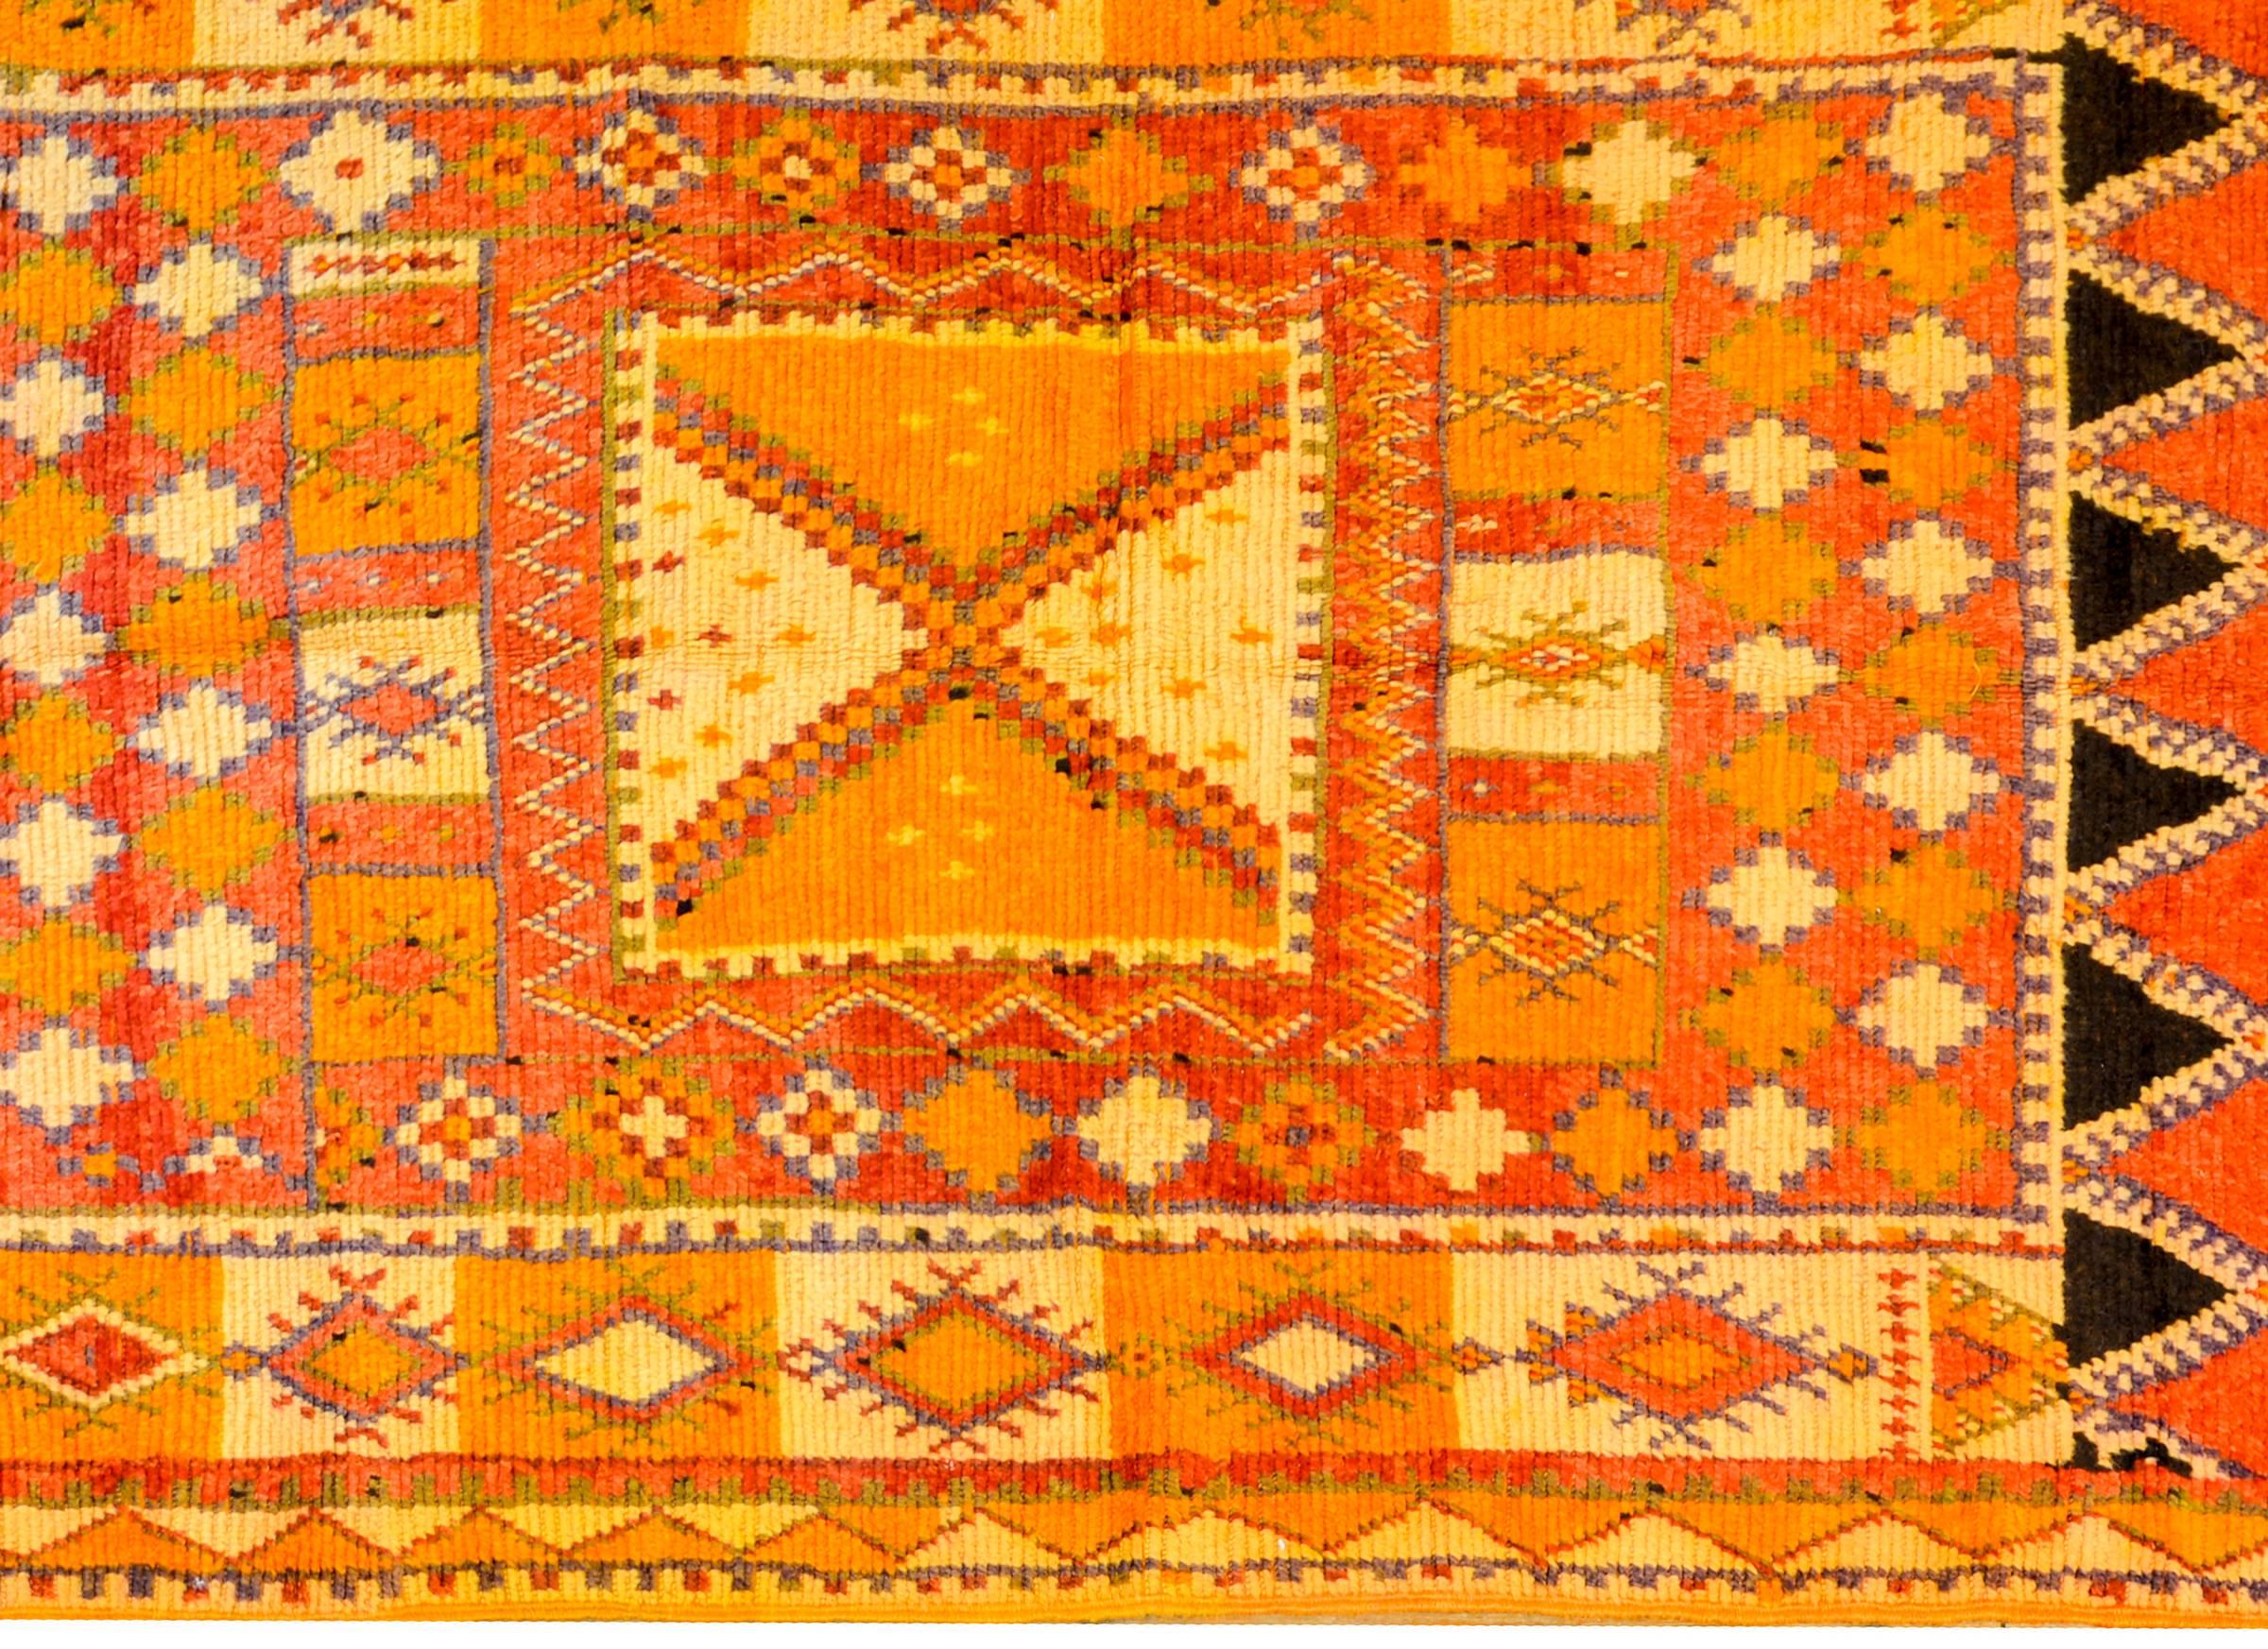 A wonderful brilliantly colored vintage Moroccan runner with an all-over geometric pattern of triangles and diamonds woven in crimson, orange, gold, and hints of violet. The border is complimentary with a similar pattern woven in similar colors.